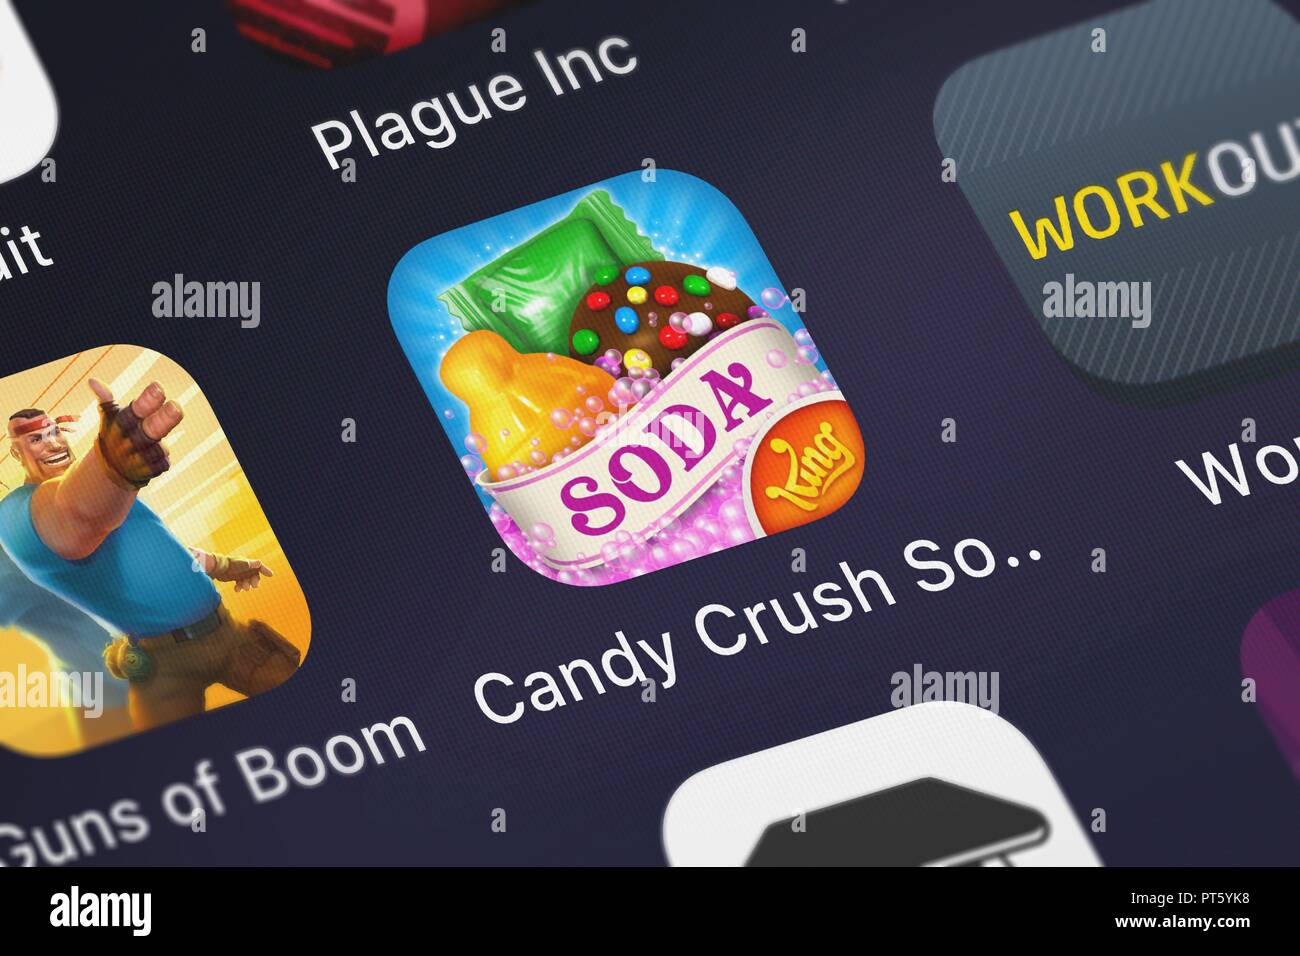 Candy crush game screen Stock Vector Images - Alamy